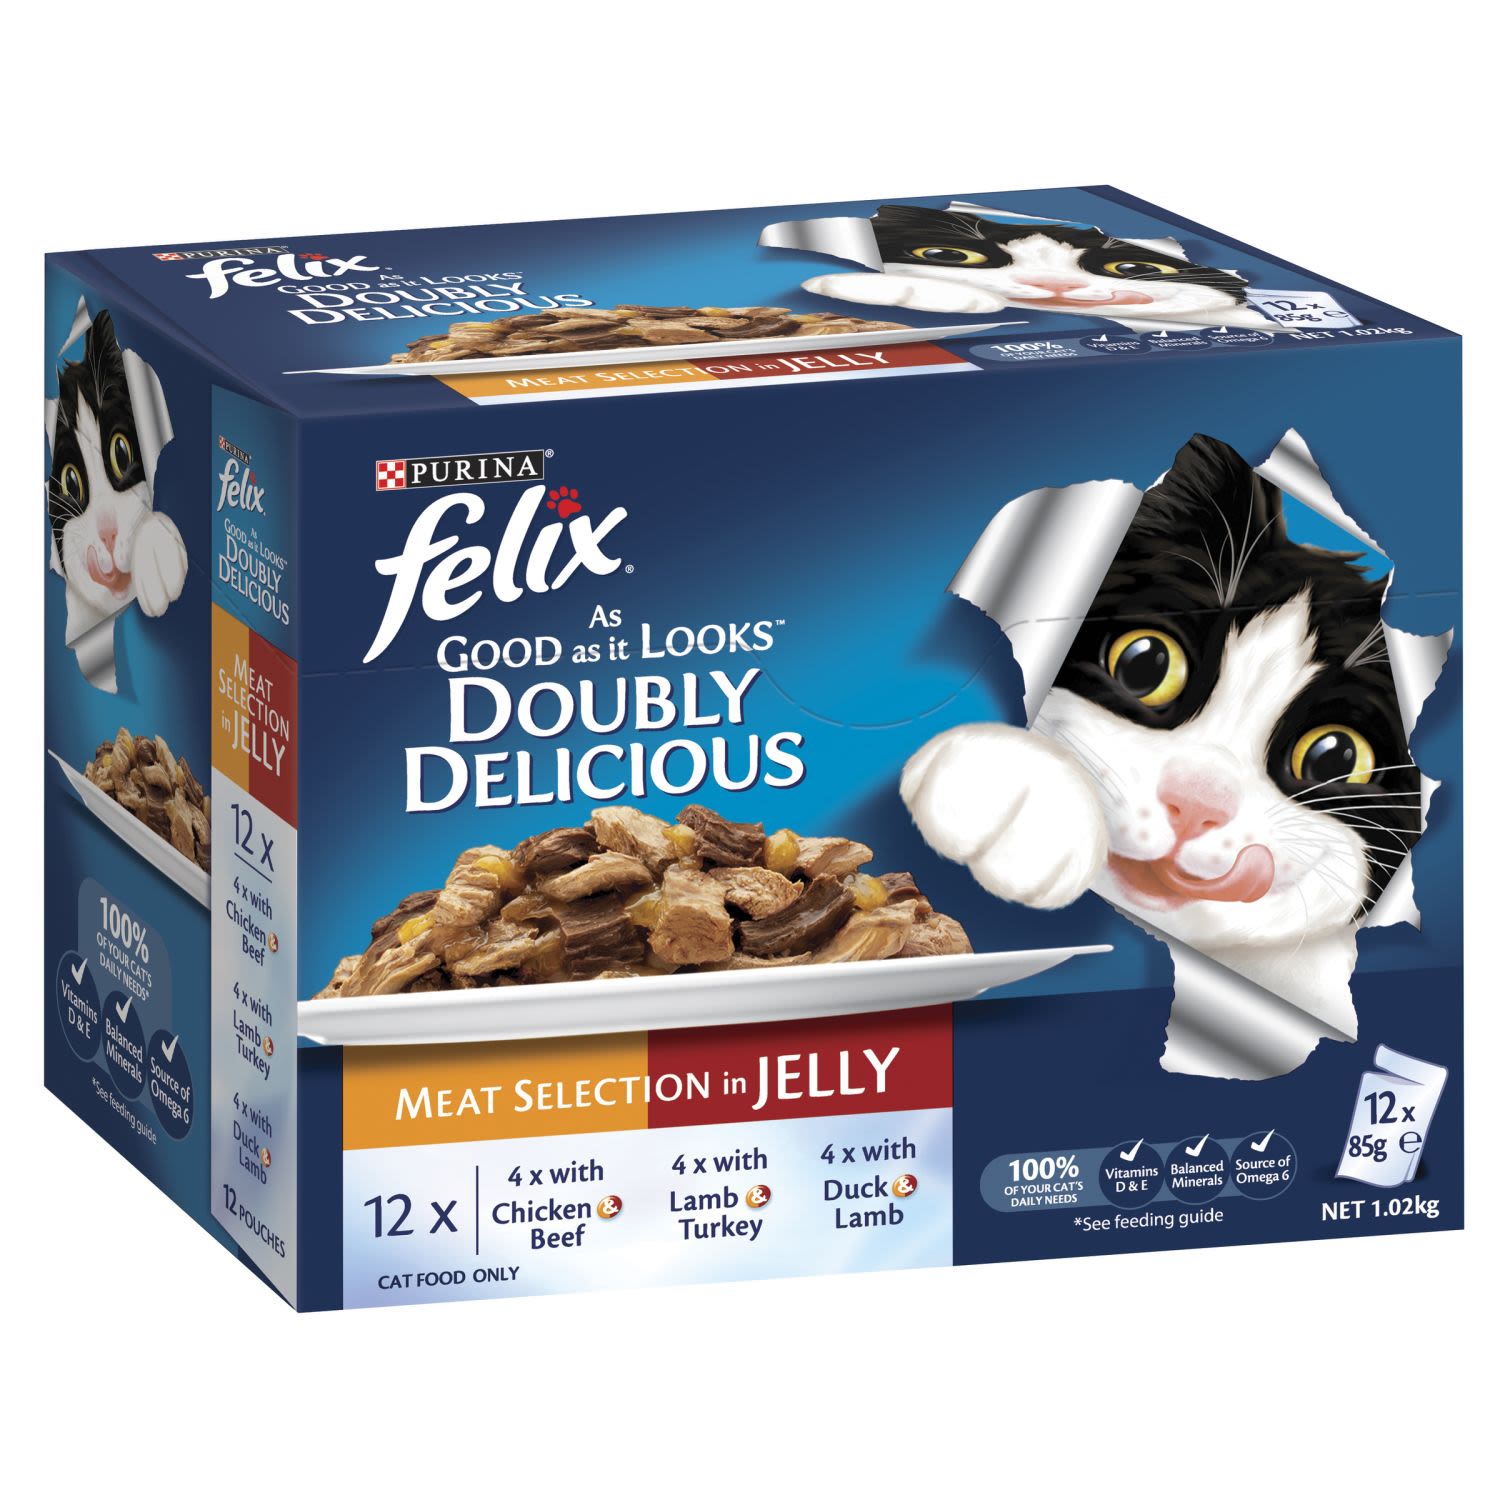 Felix Adult As Good as it Looks Doubly Delicious Meat Selection in Jelly Wet Cat Food, 12 Each